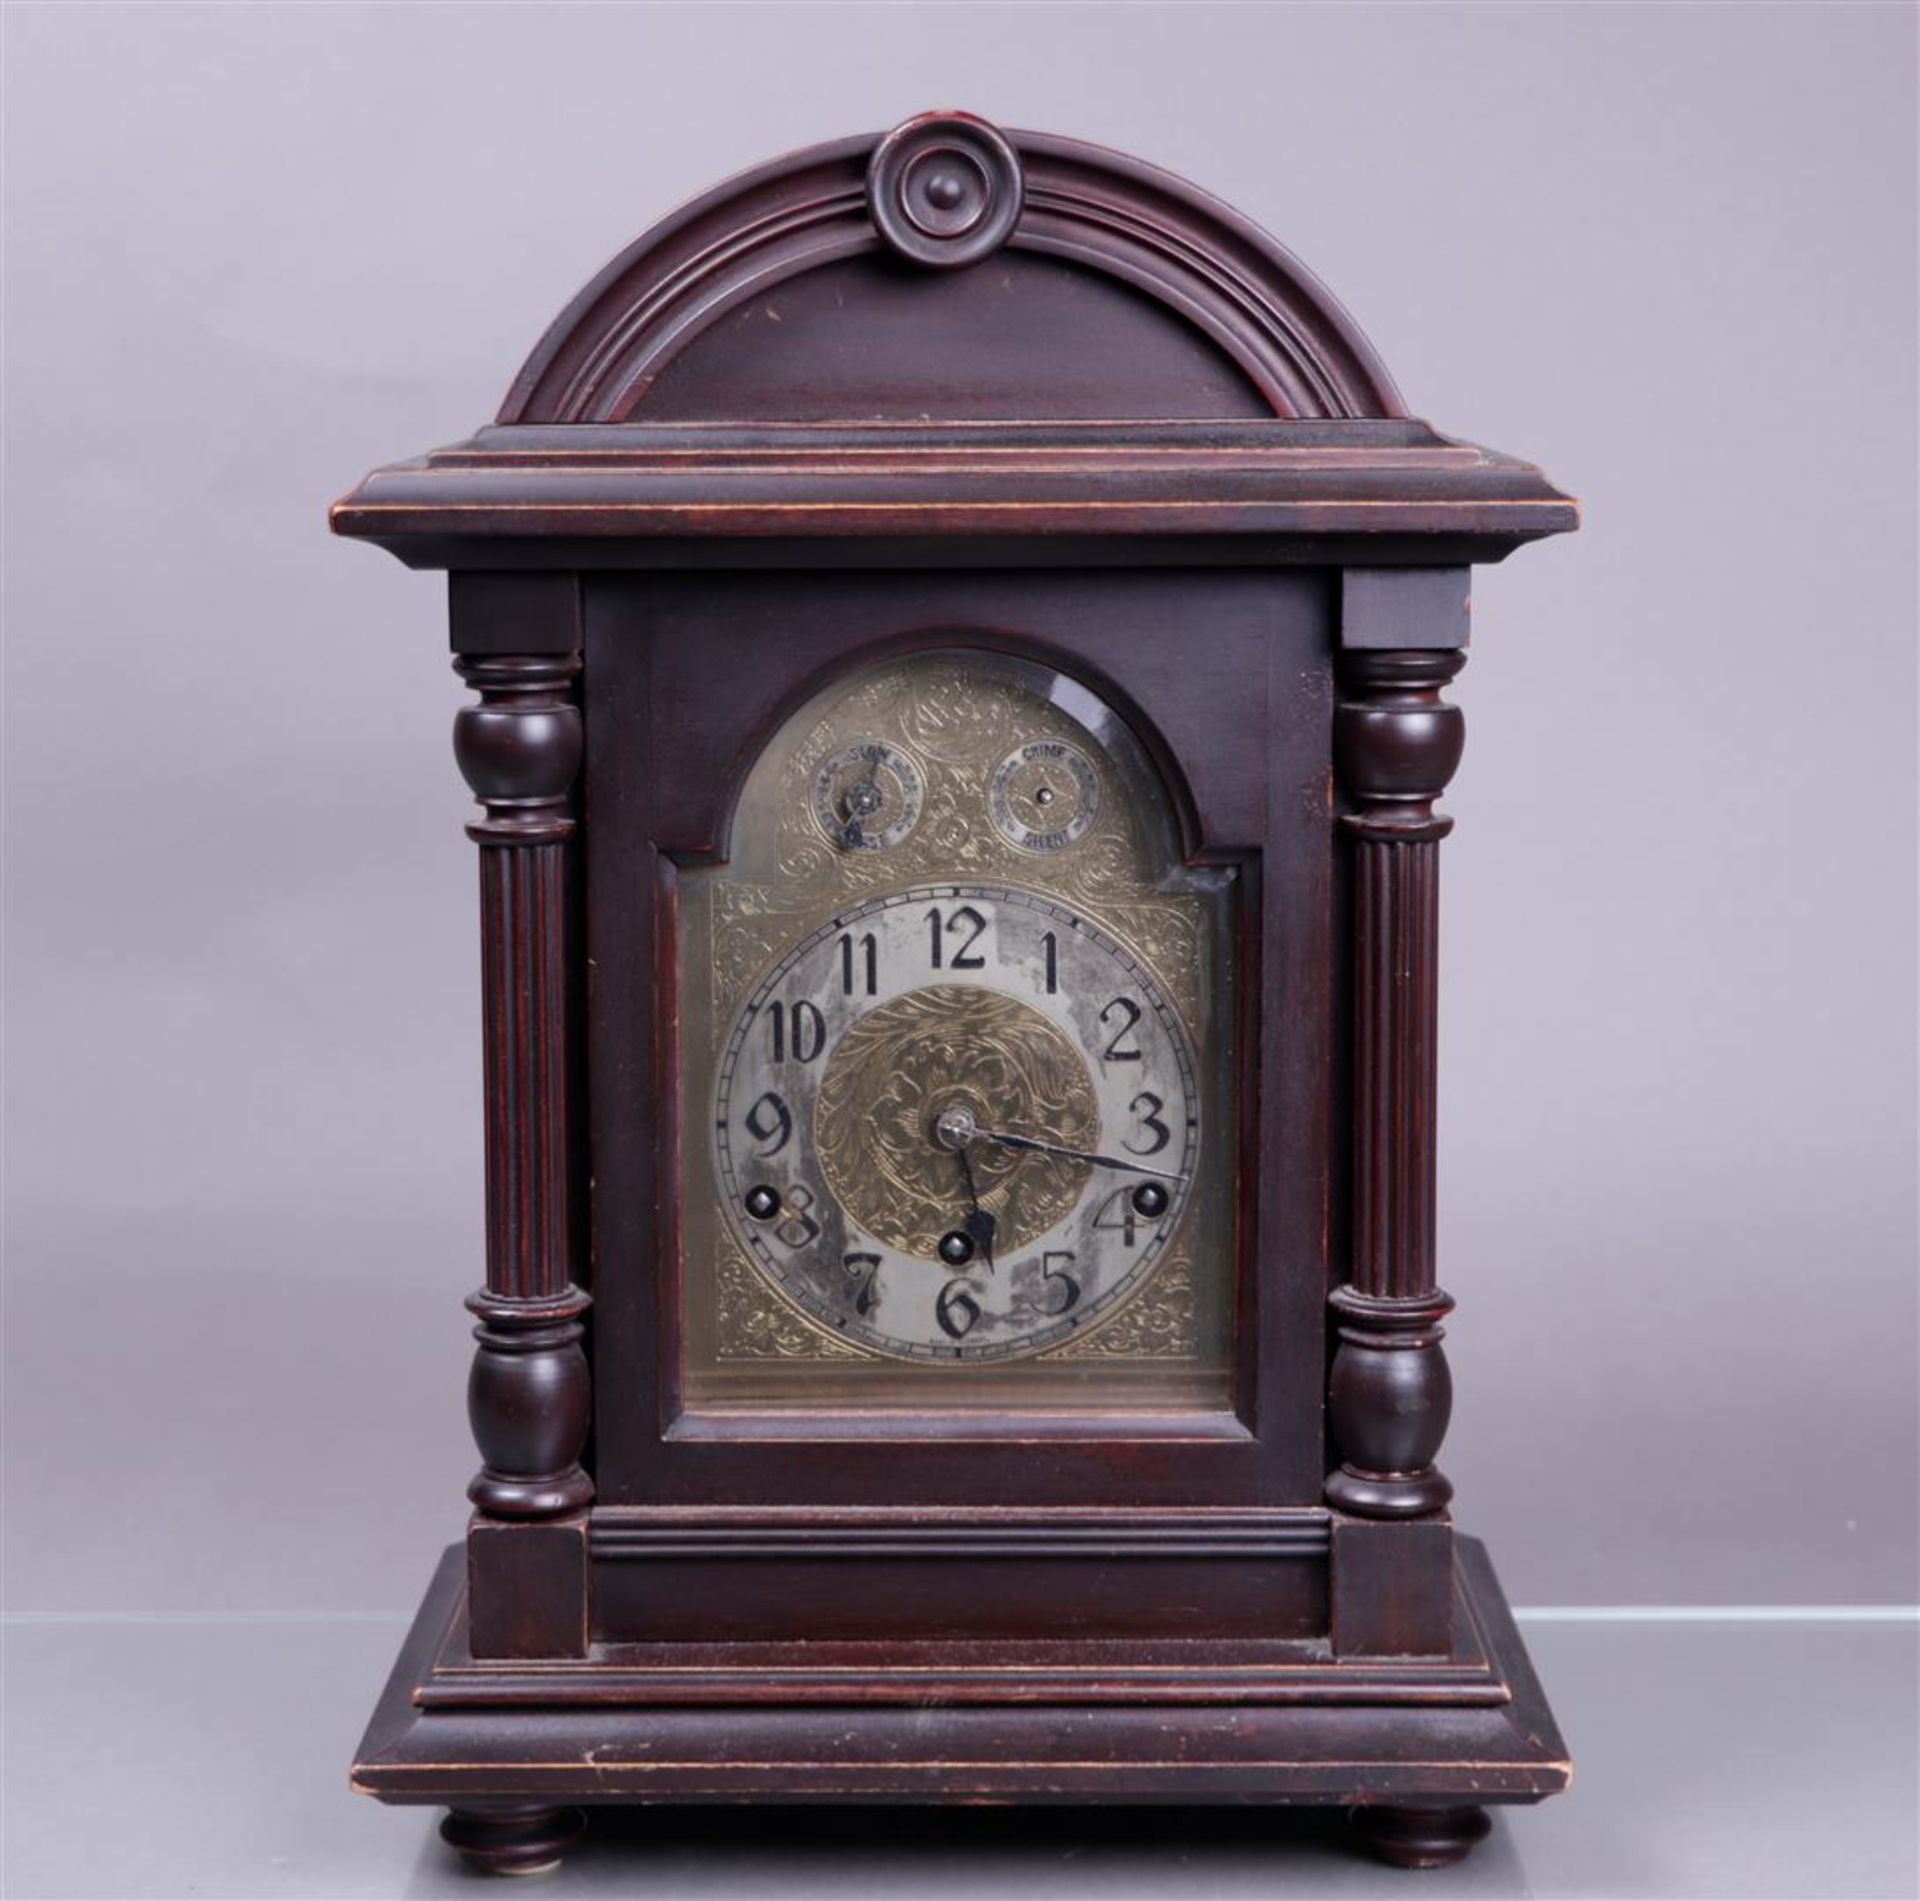 A Kienzle table clock in a softwood case. Equipped with music and pendulum. First quarter of the 20t